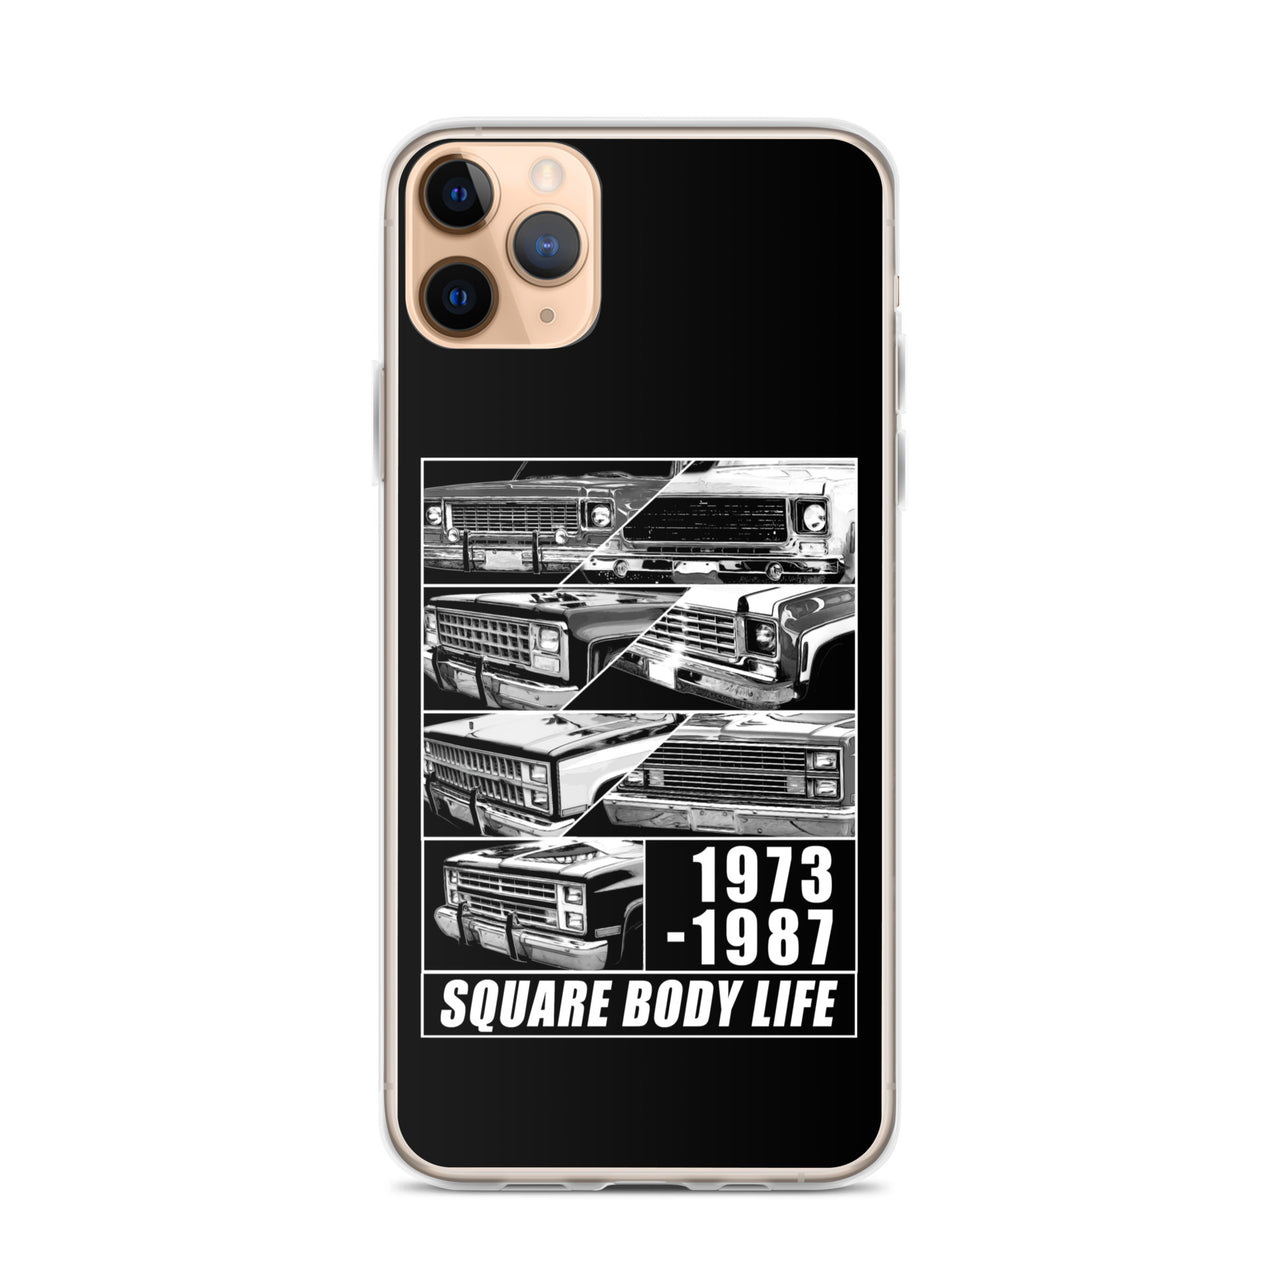 Square Body Truck Grilles Phone Case For iPhone 11 pro max